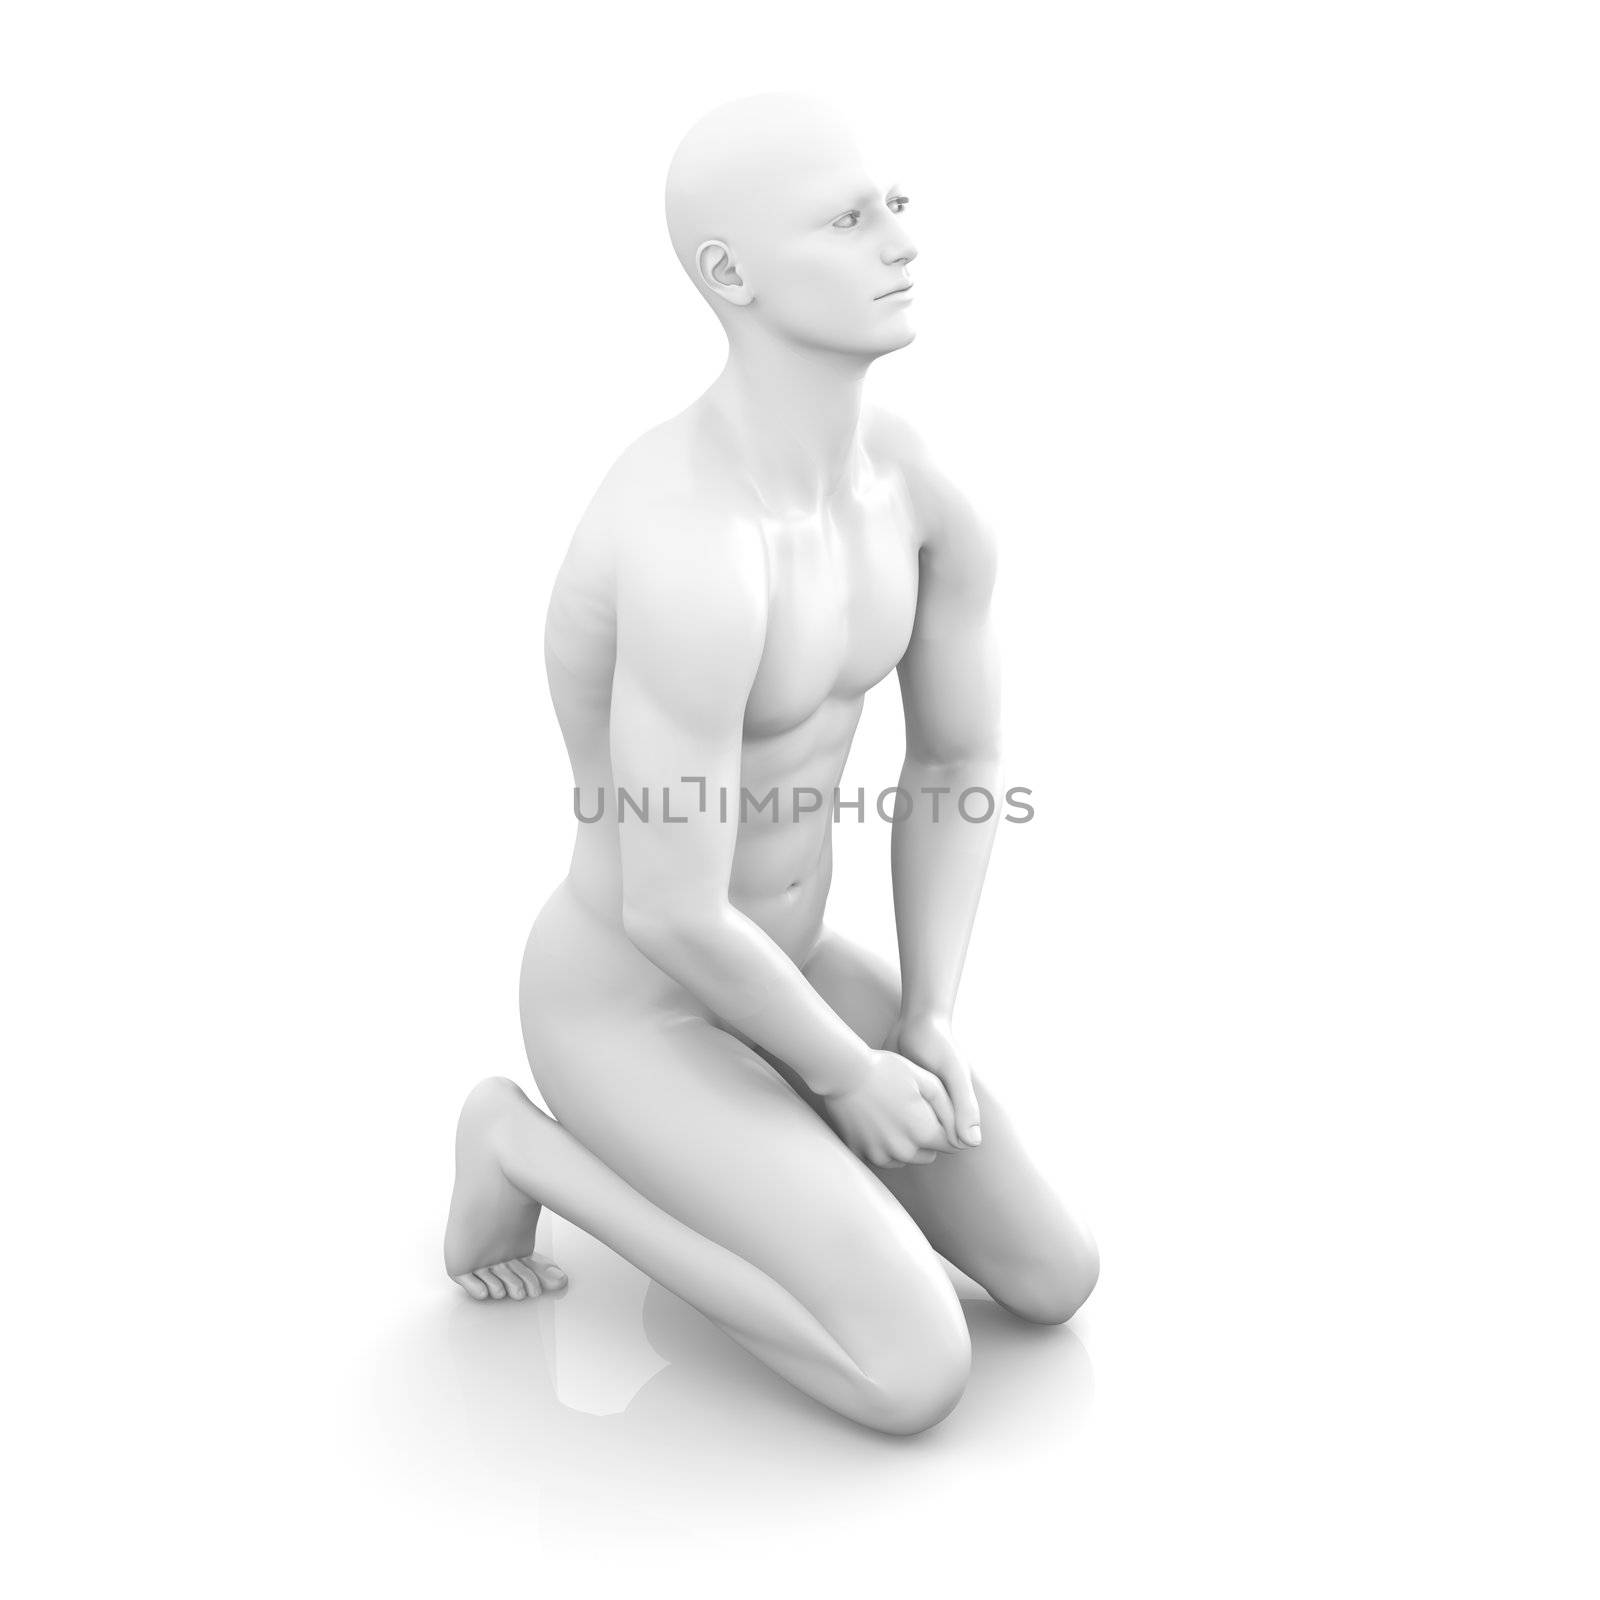 Symvolic 3D rendered illustration of a generic male human meditating in the dragon seat asana.